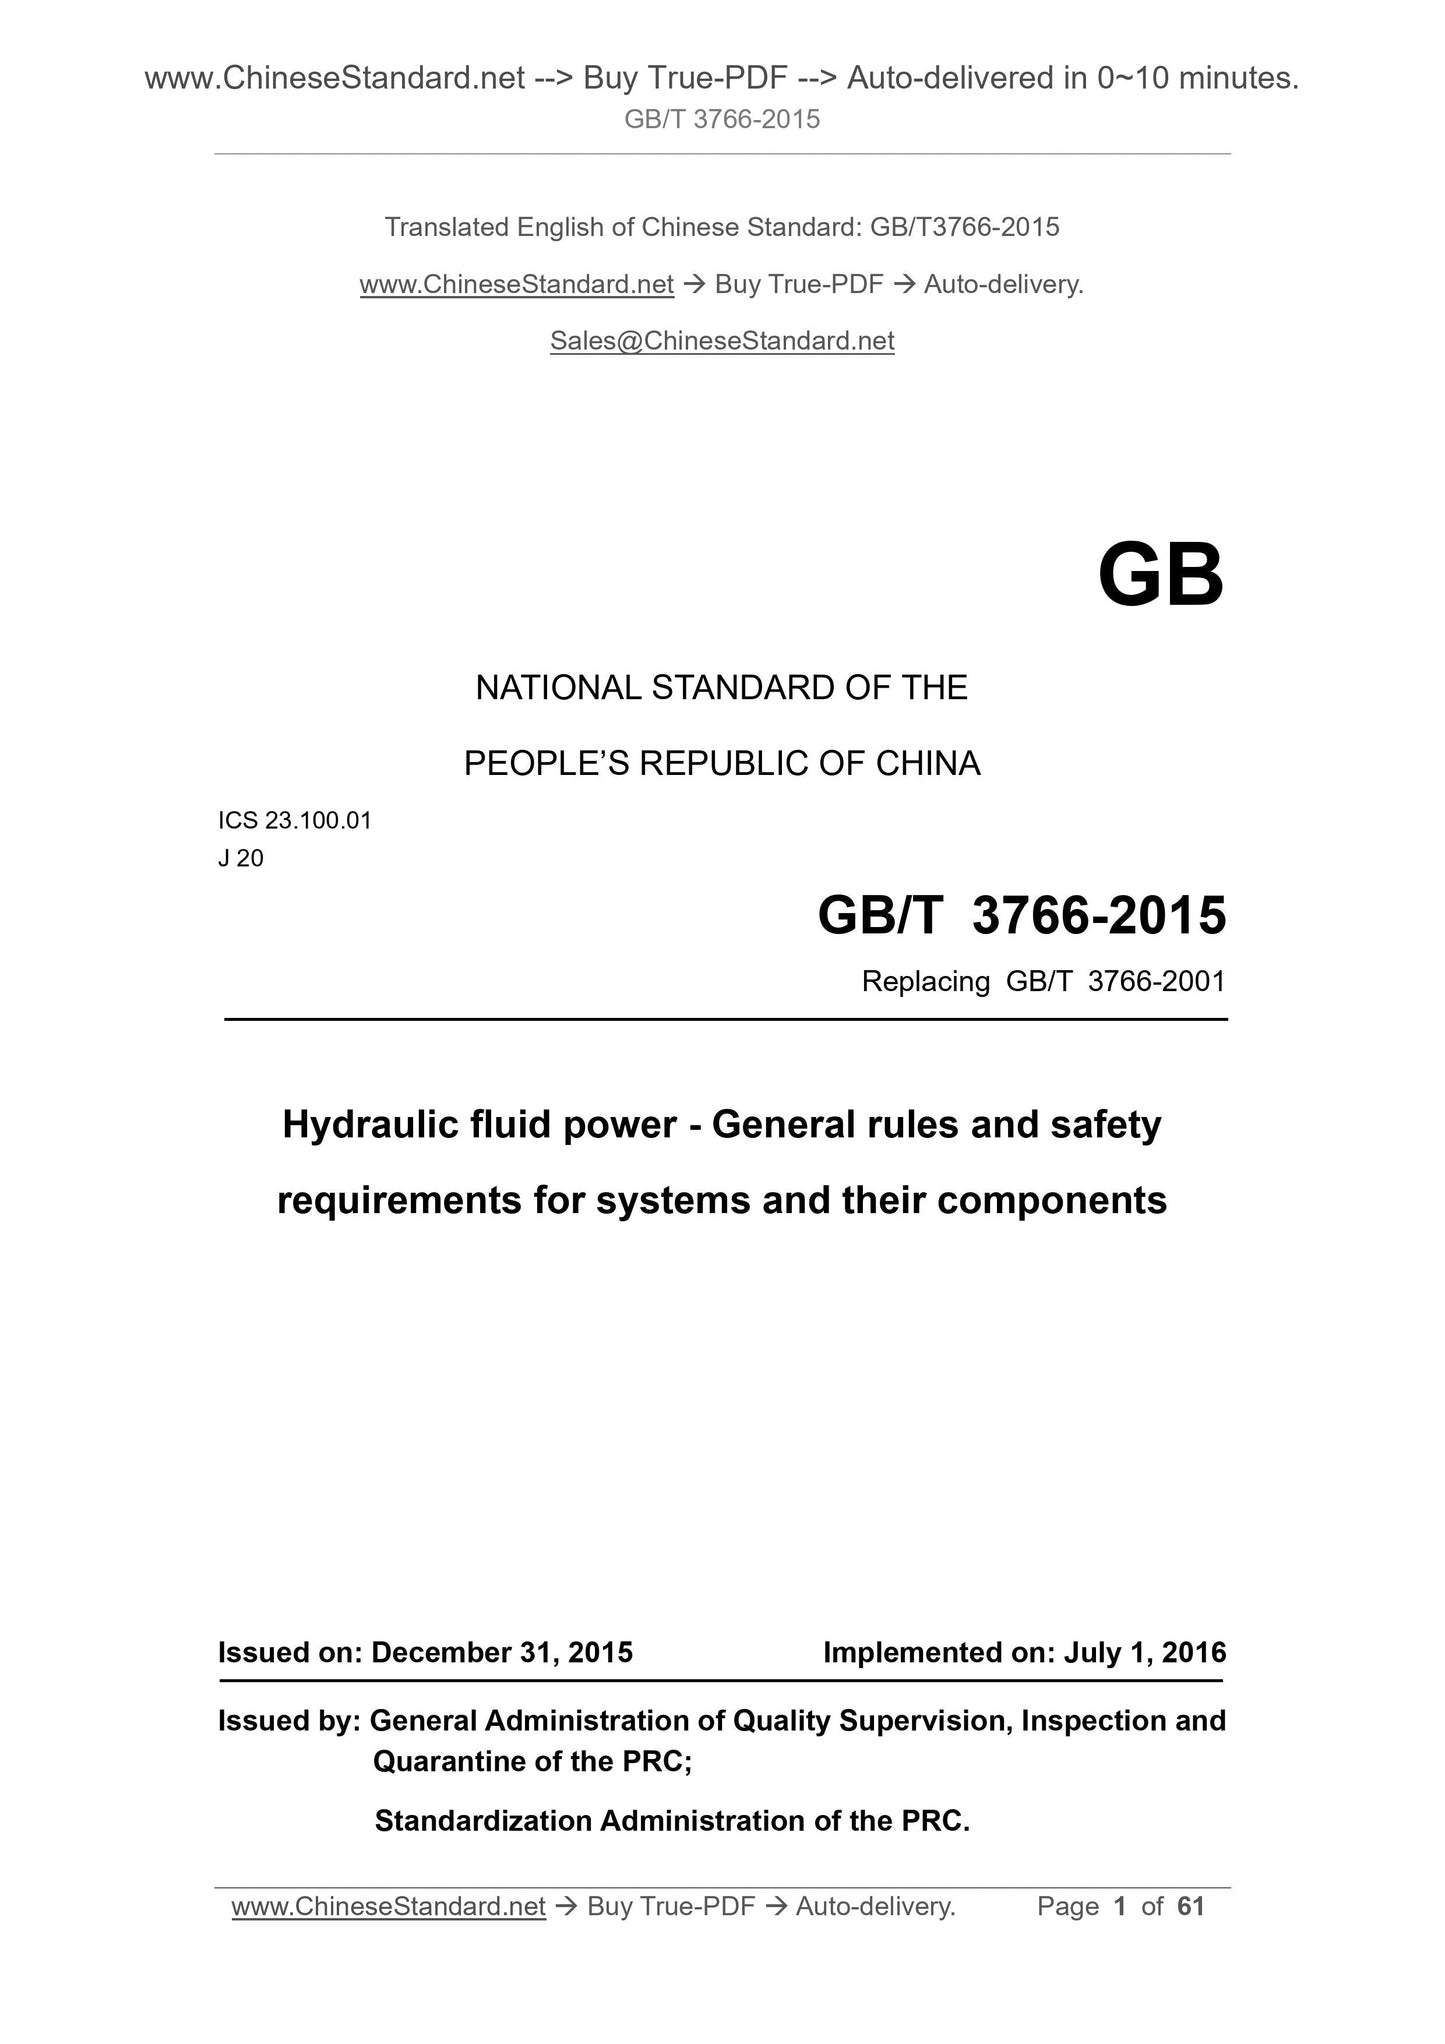 GB/T 3766-2015 Page 1